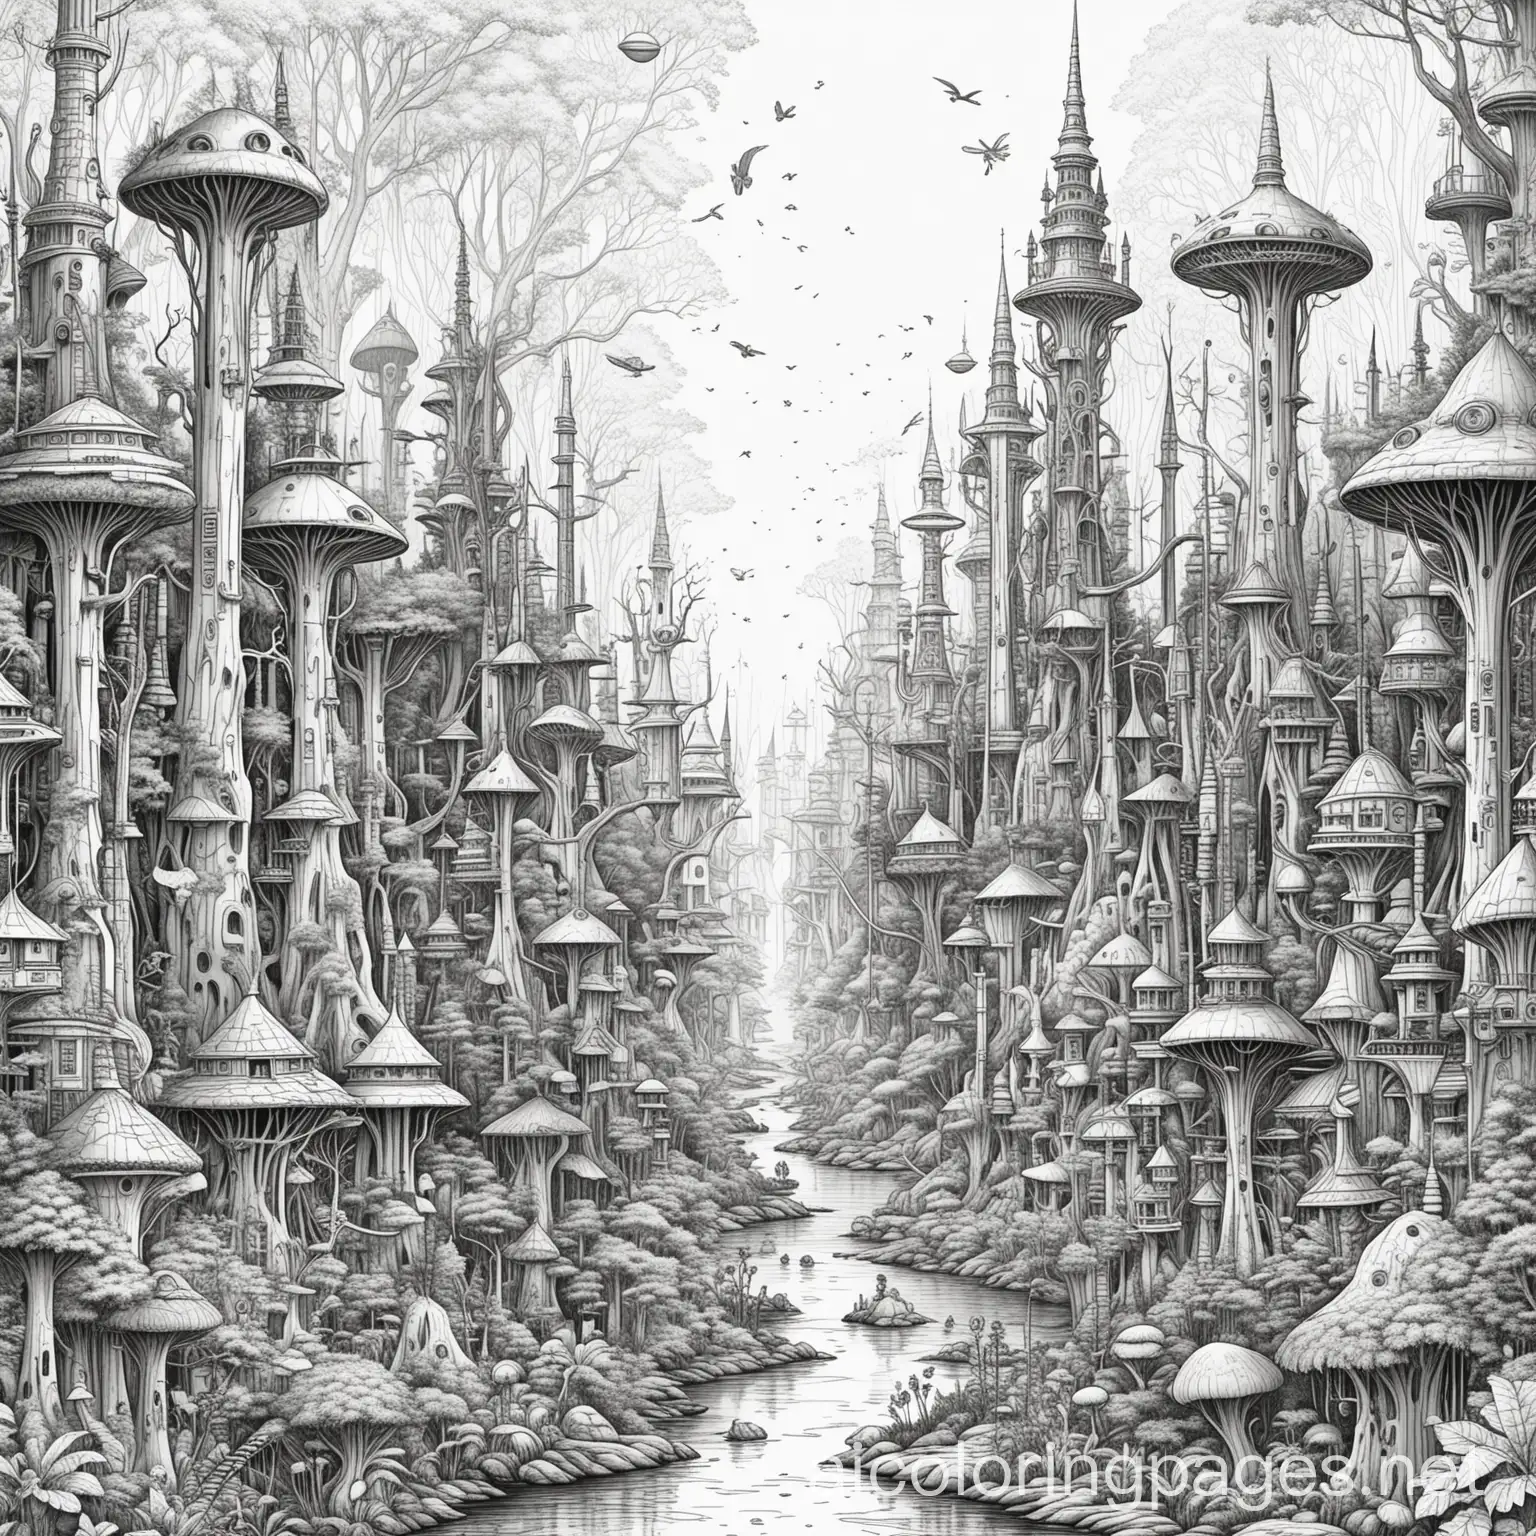 Enchanting-Alien-City-in-a-Magical-Forest-Coloring-Page-with-Tall-Extraterrestrial-Beings